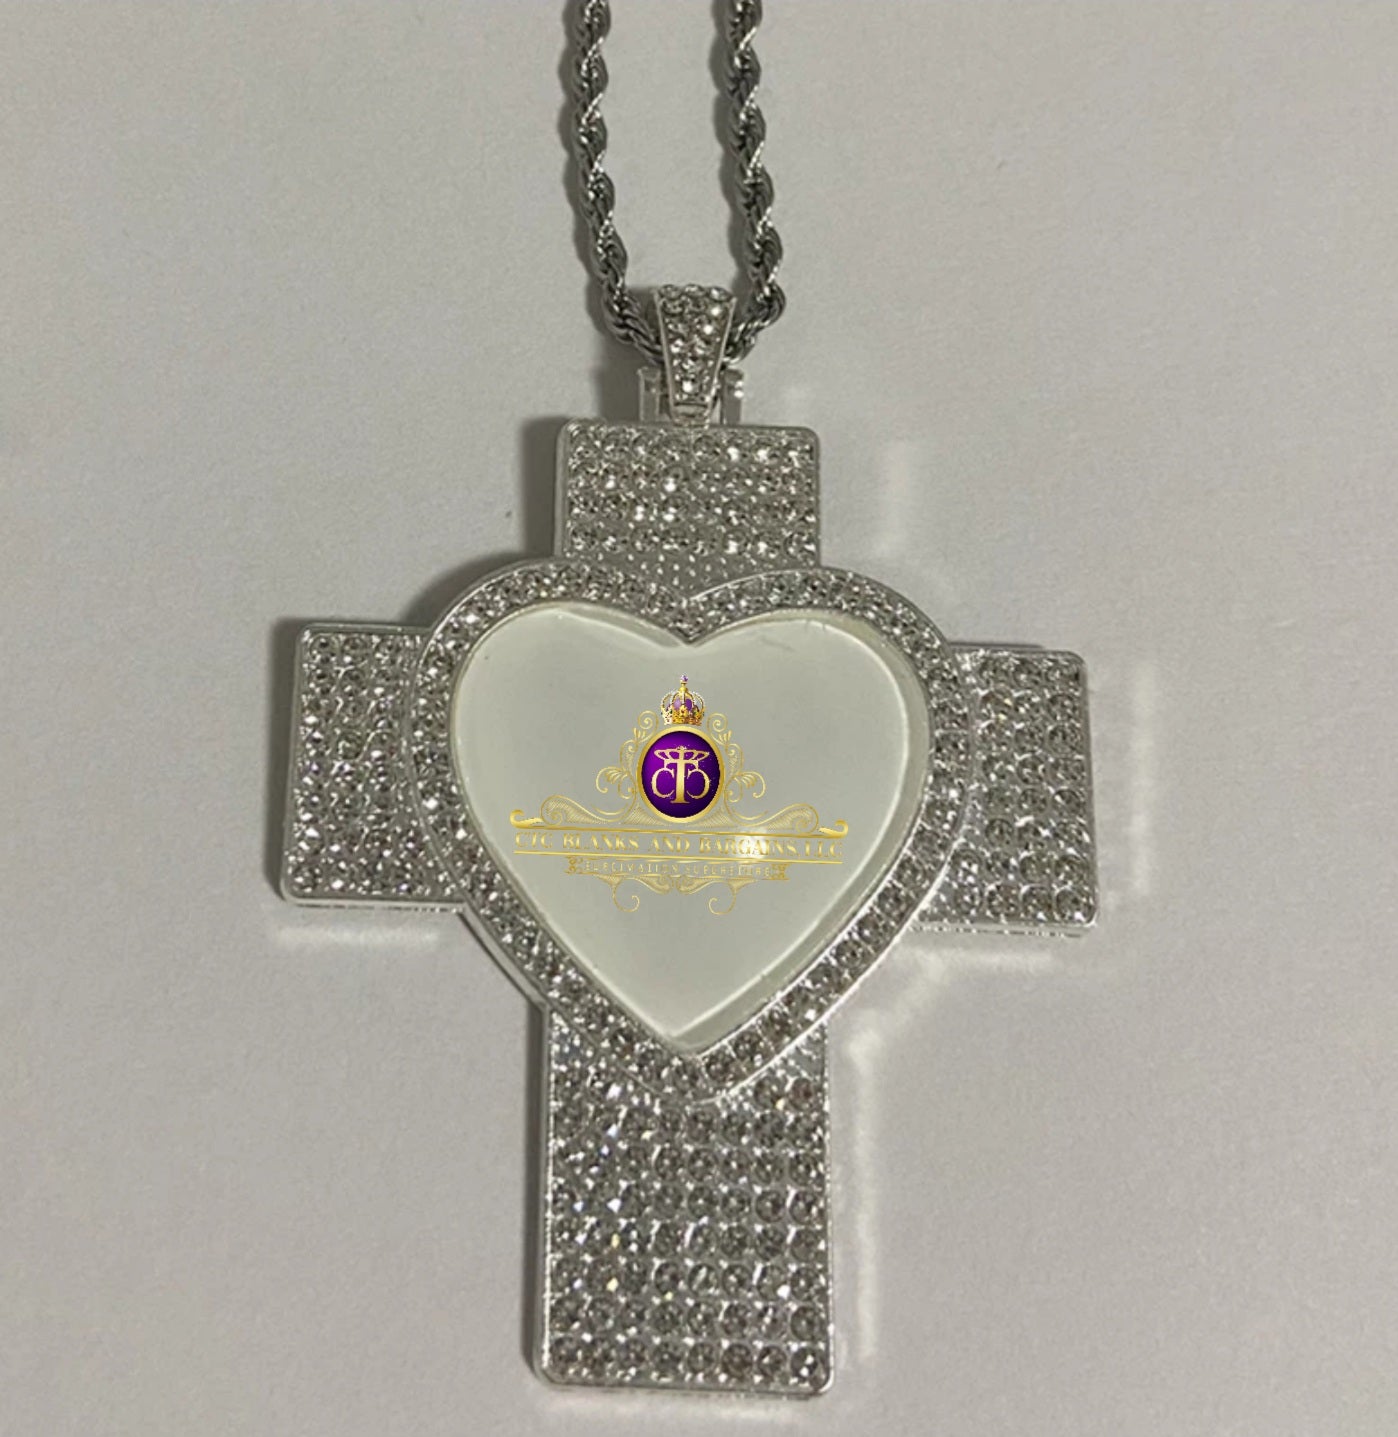 Bling Cross Heart Pendant and Necklace